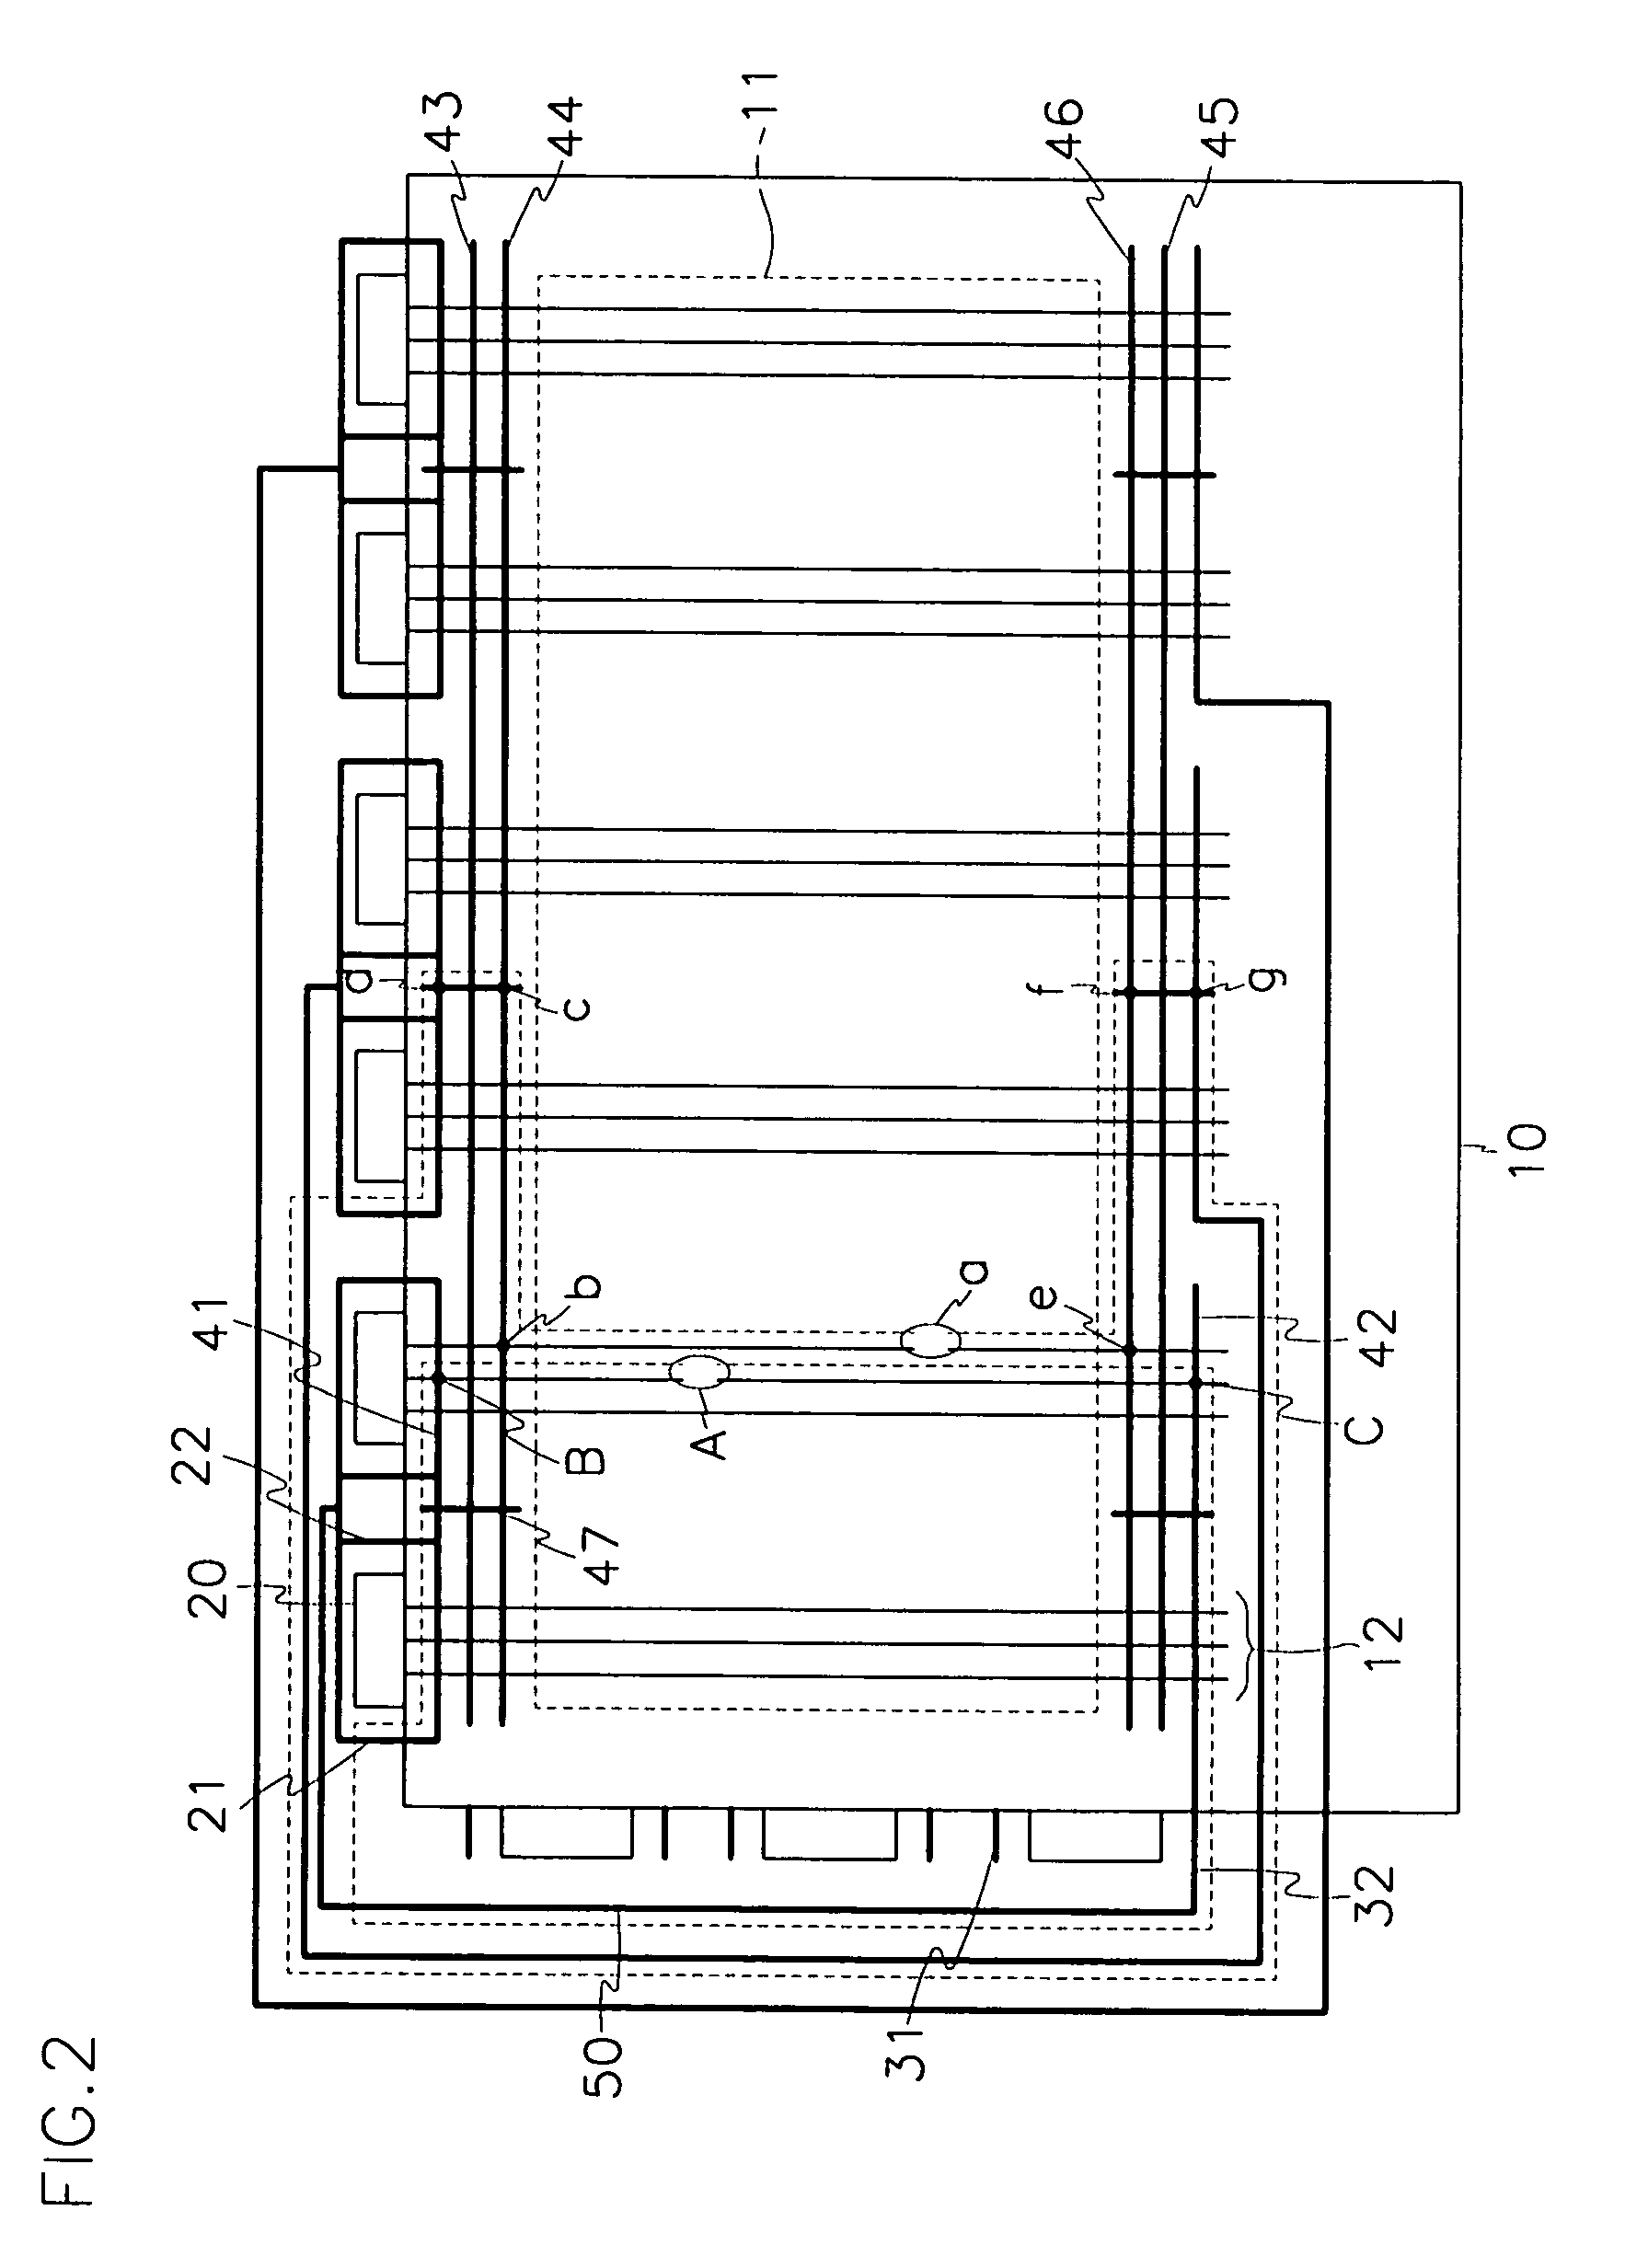 Thin film transistor array substrate for a liquid crystal display having repair lines